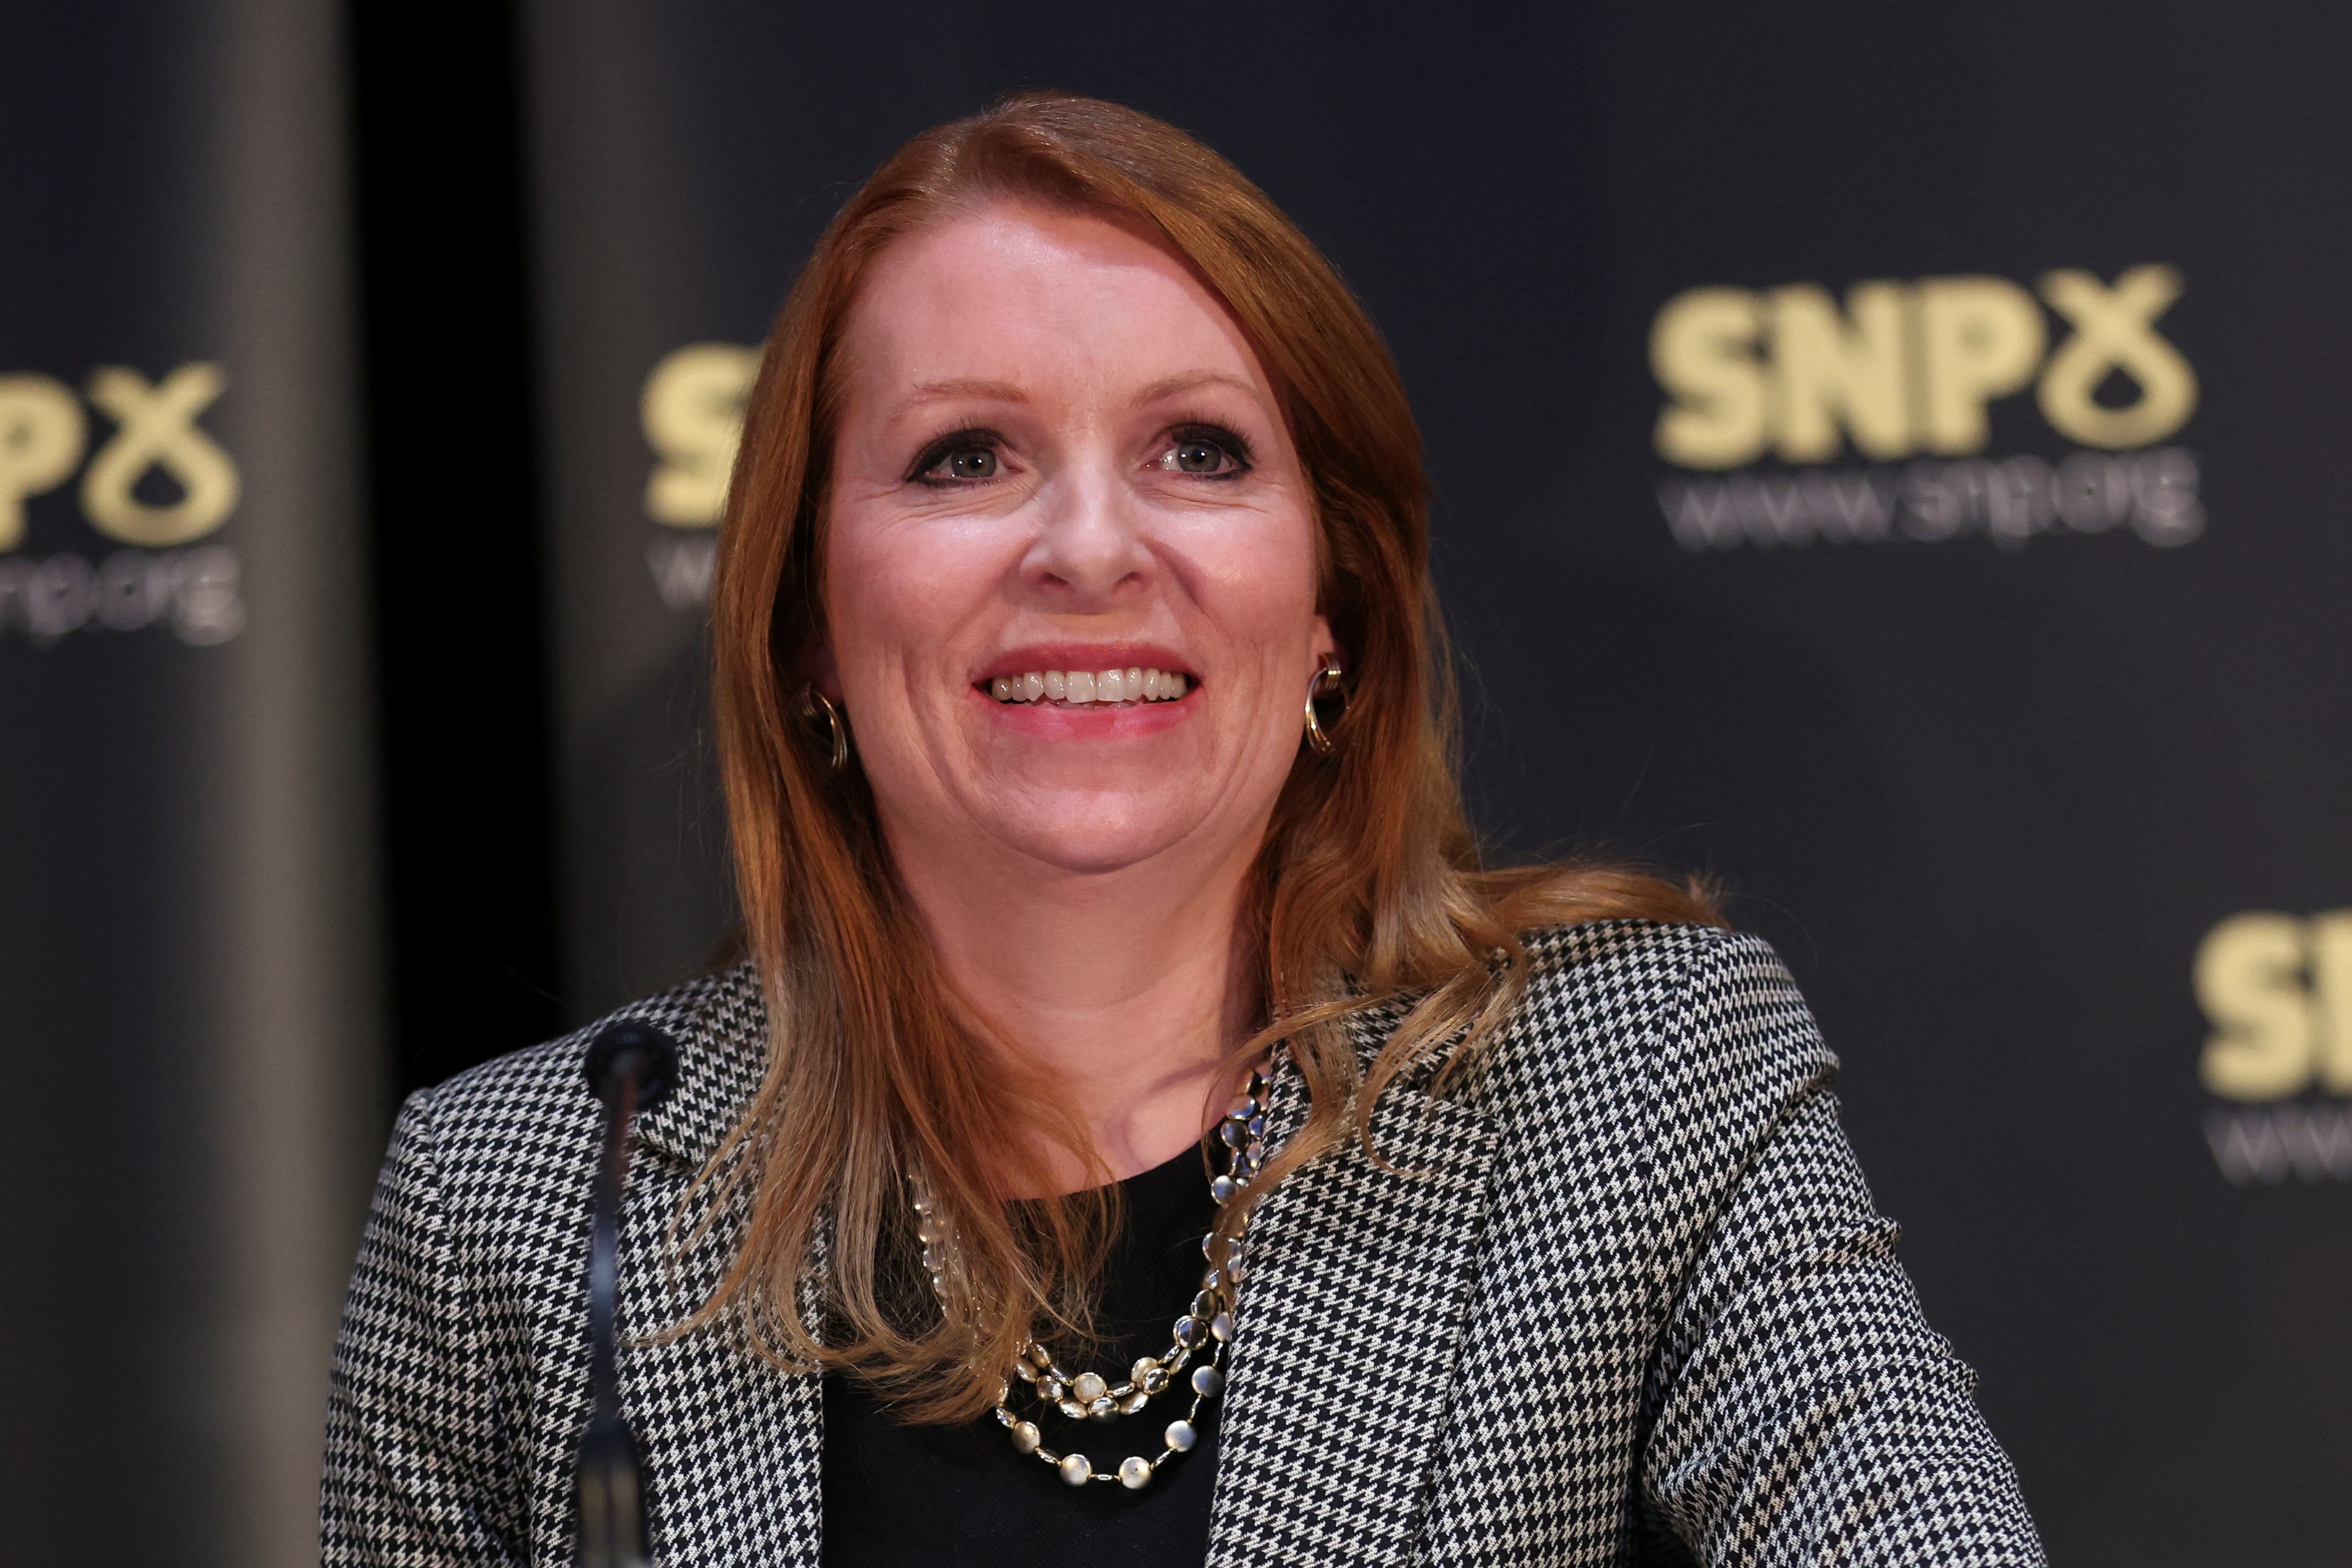 Ash Regan has insisted she is in the SNP leadership contest to win it despite being the ‘least well-known’ of the three candidates (Russell Cheyne/PA)